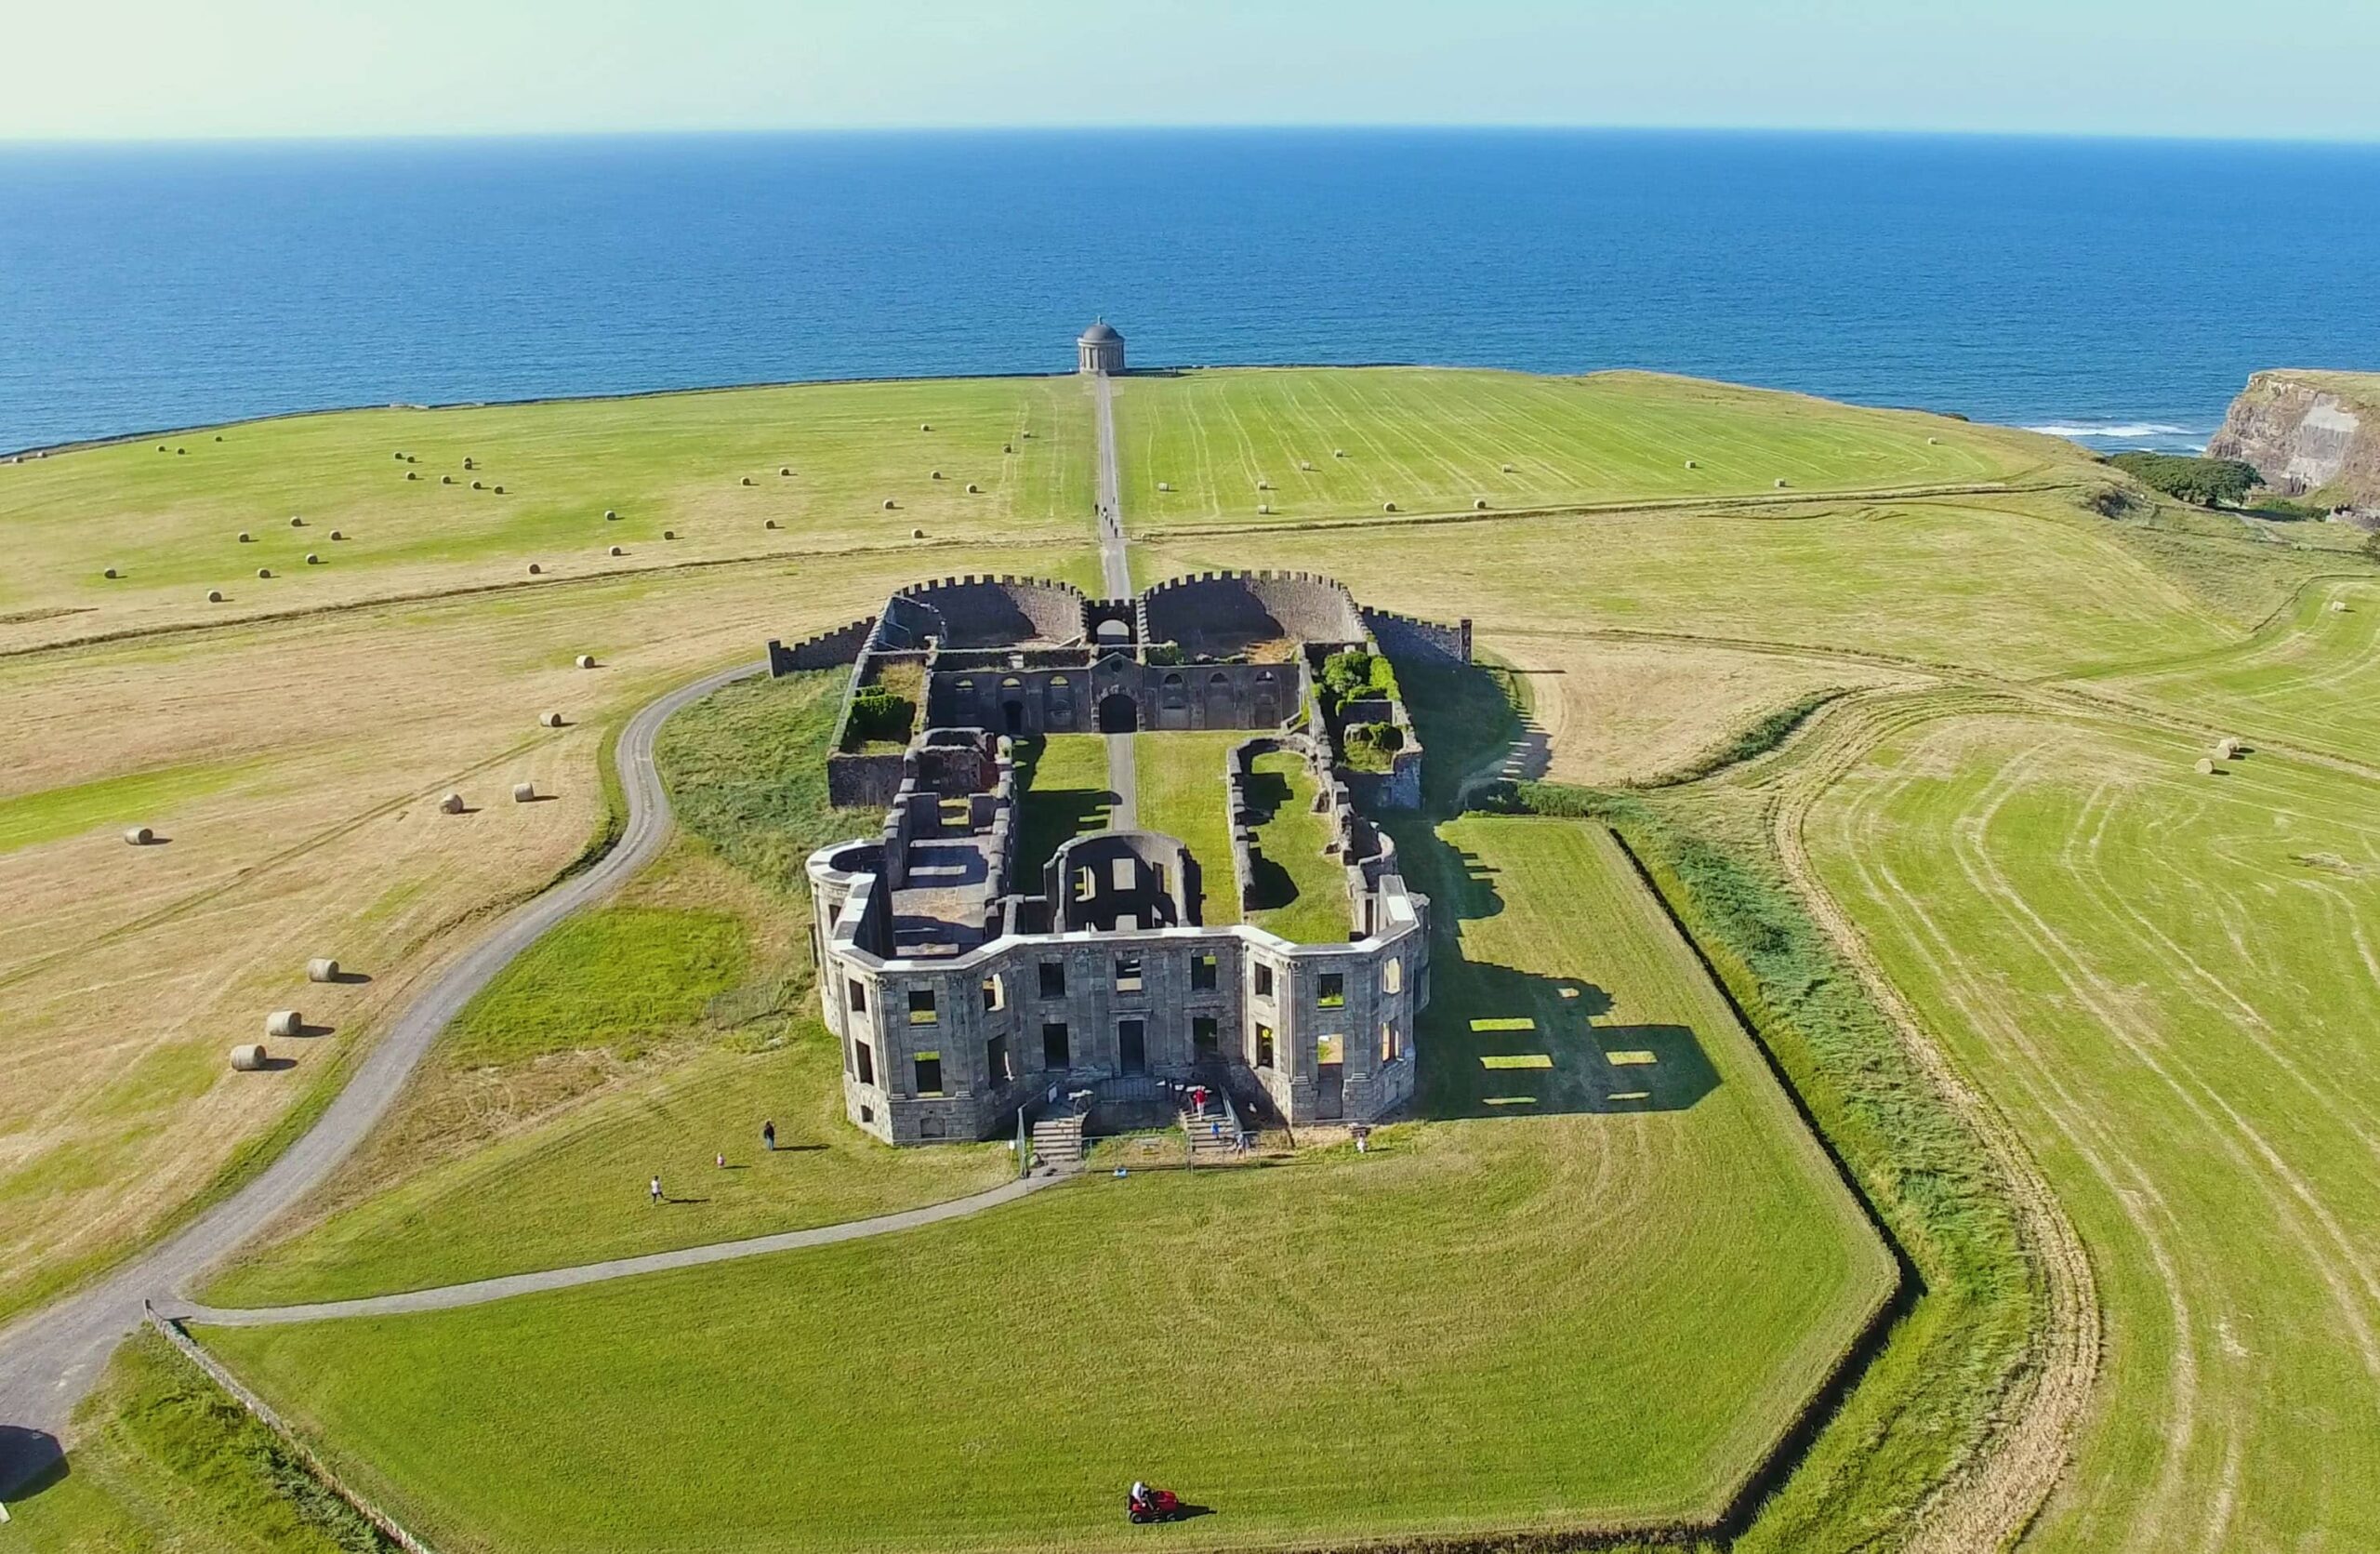 Downhill Demesne Mussenden temple and Downhill House from the air